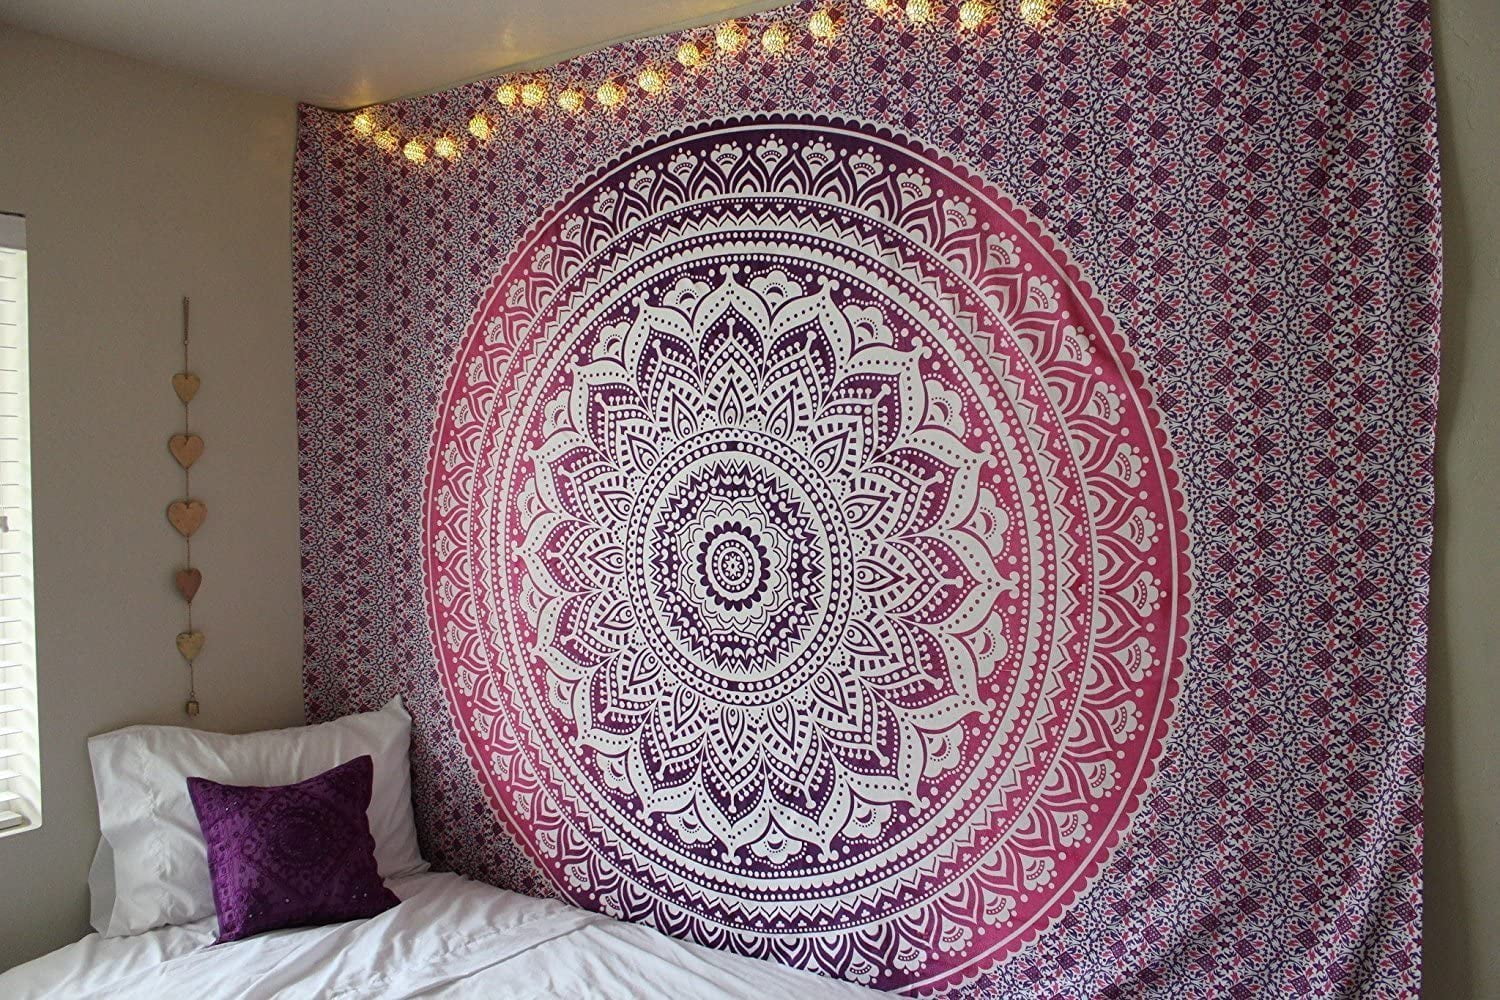 Details about   Indian Mandala Gold Ombre Bed Sheet Tapestry Wall Hanging Hippie Boho Bedding 